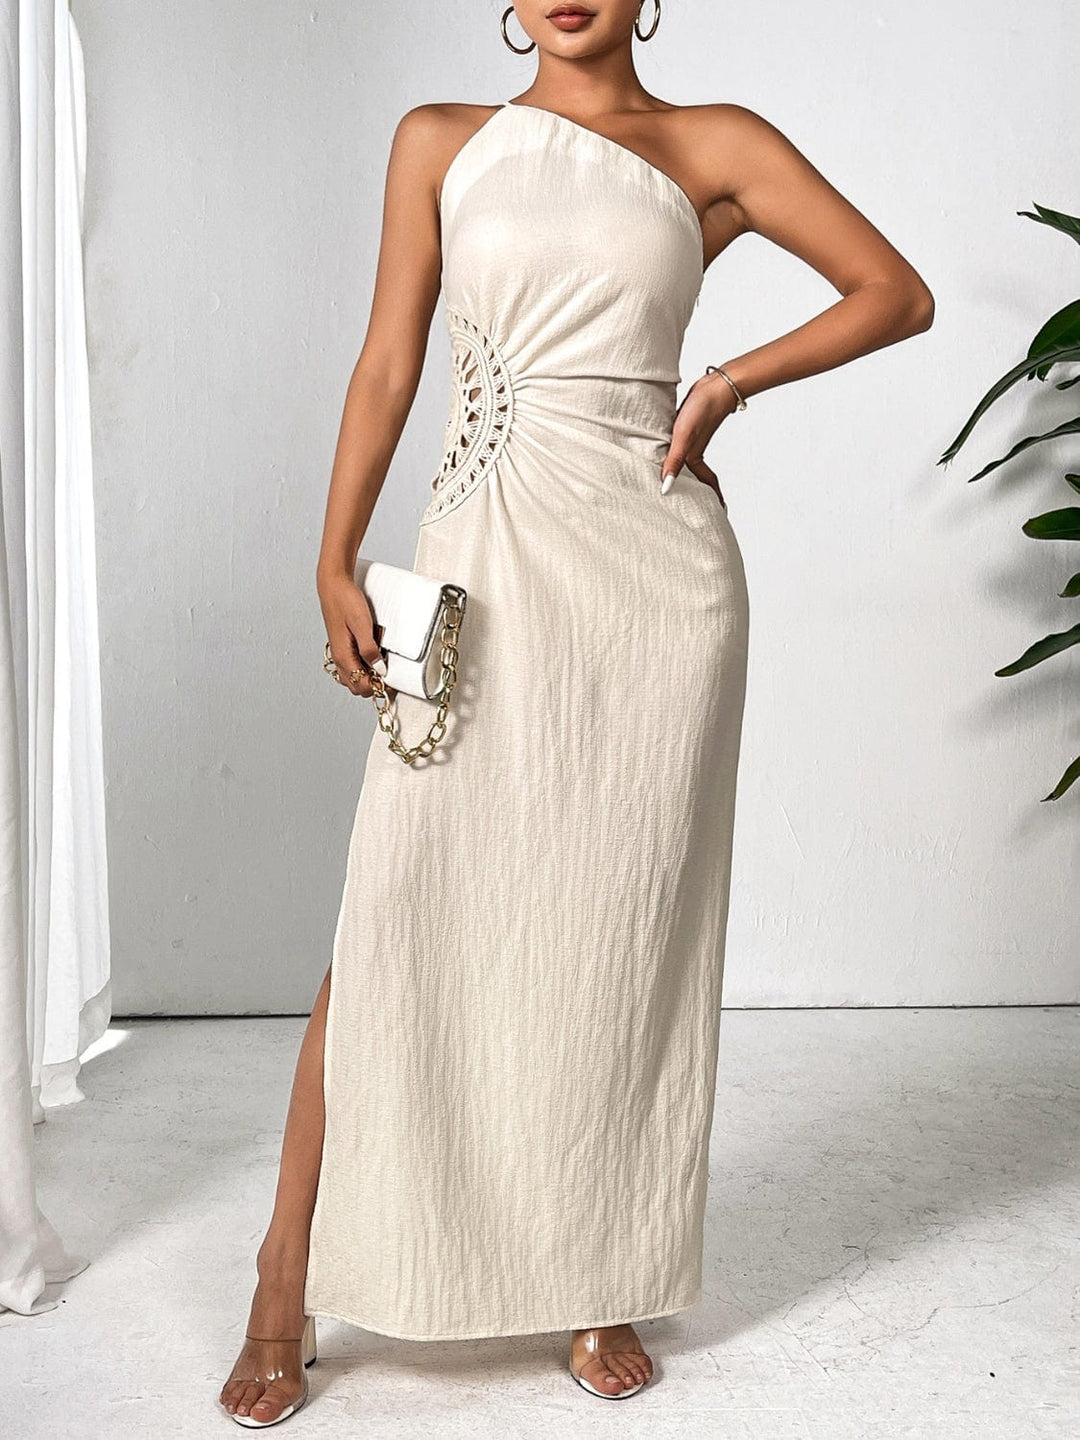 The802Gypsy Dresses/Evening Dresses Beige / S GYPSY-One Shoulder Sleeveless Maxi Dress